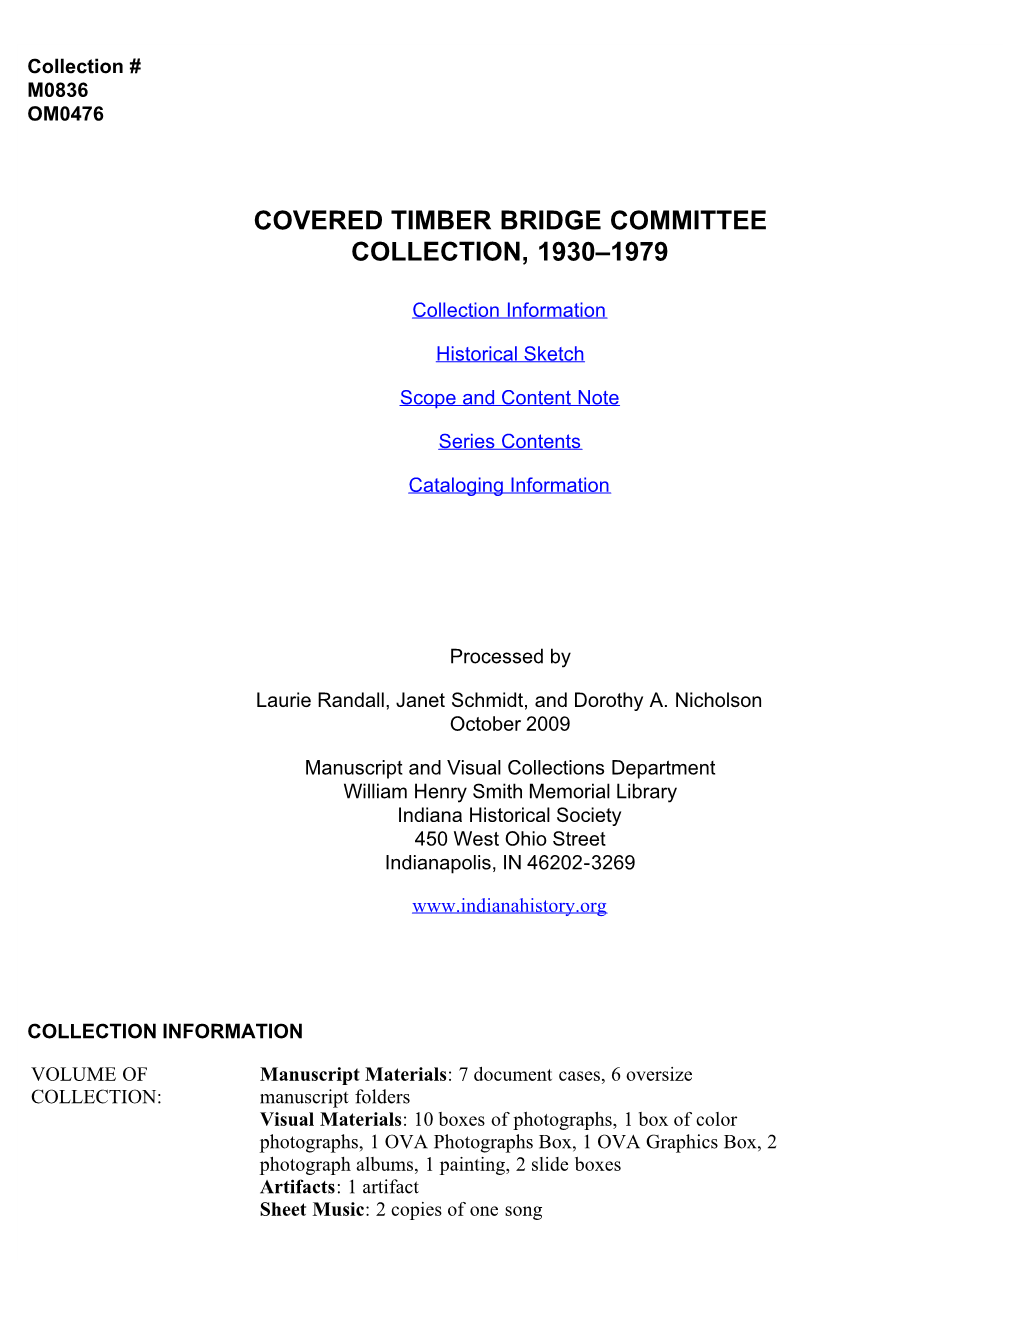 Covered Timber Bridge Committee Collection, 1930–1979